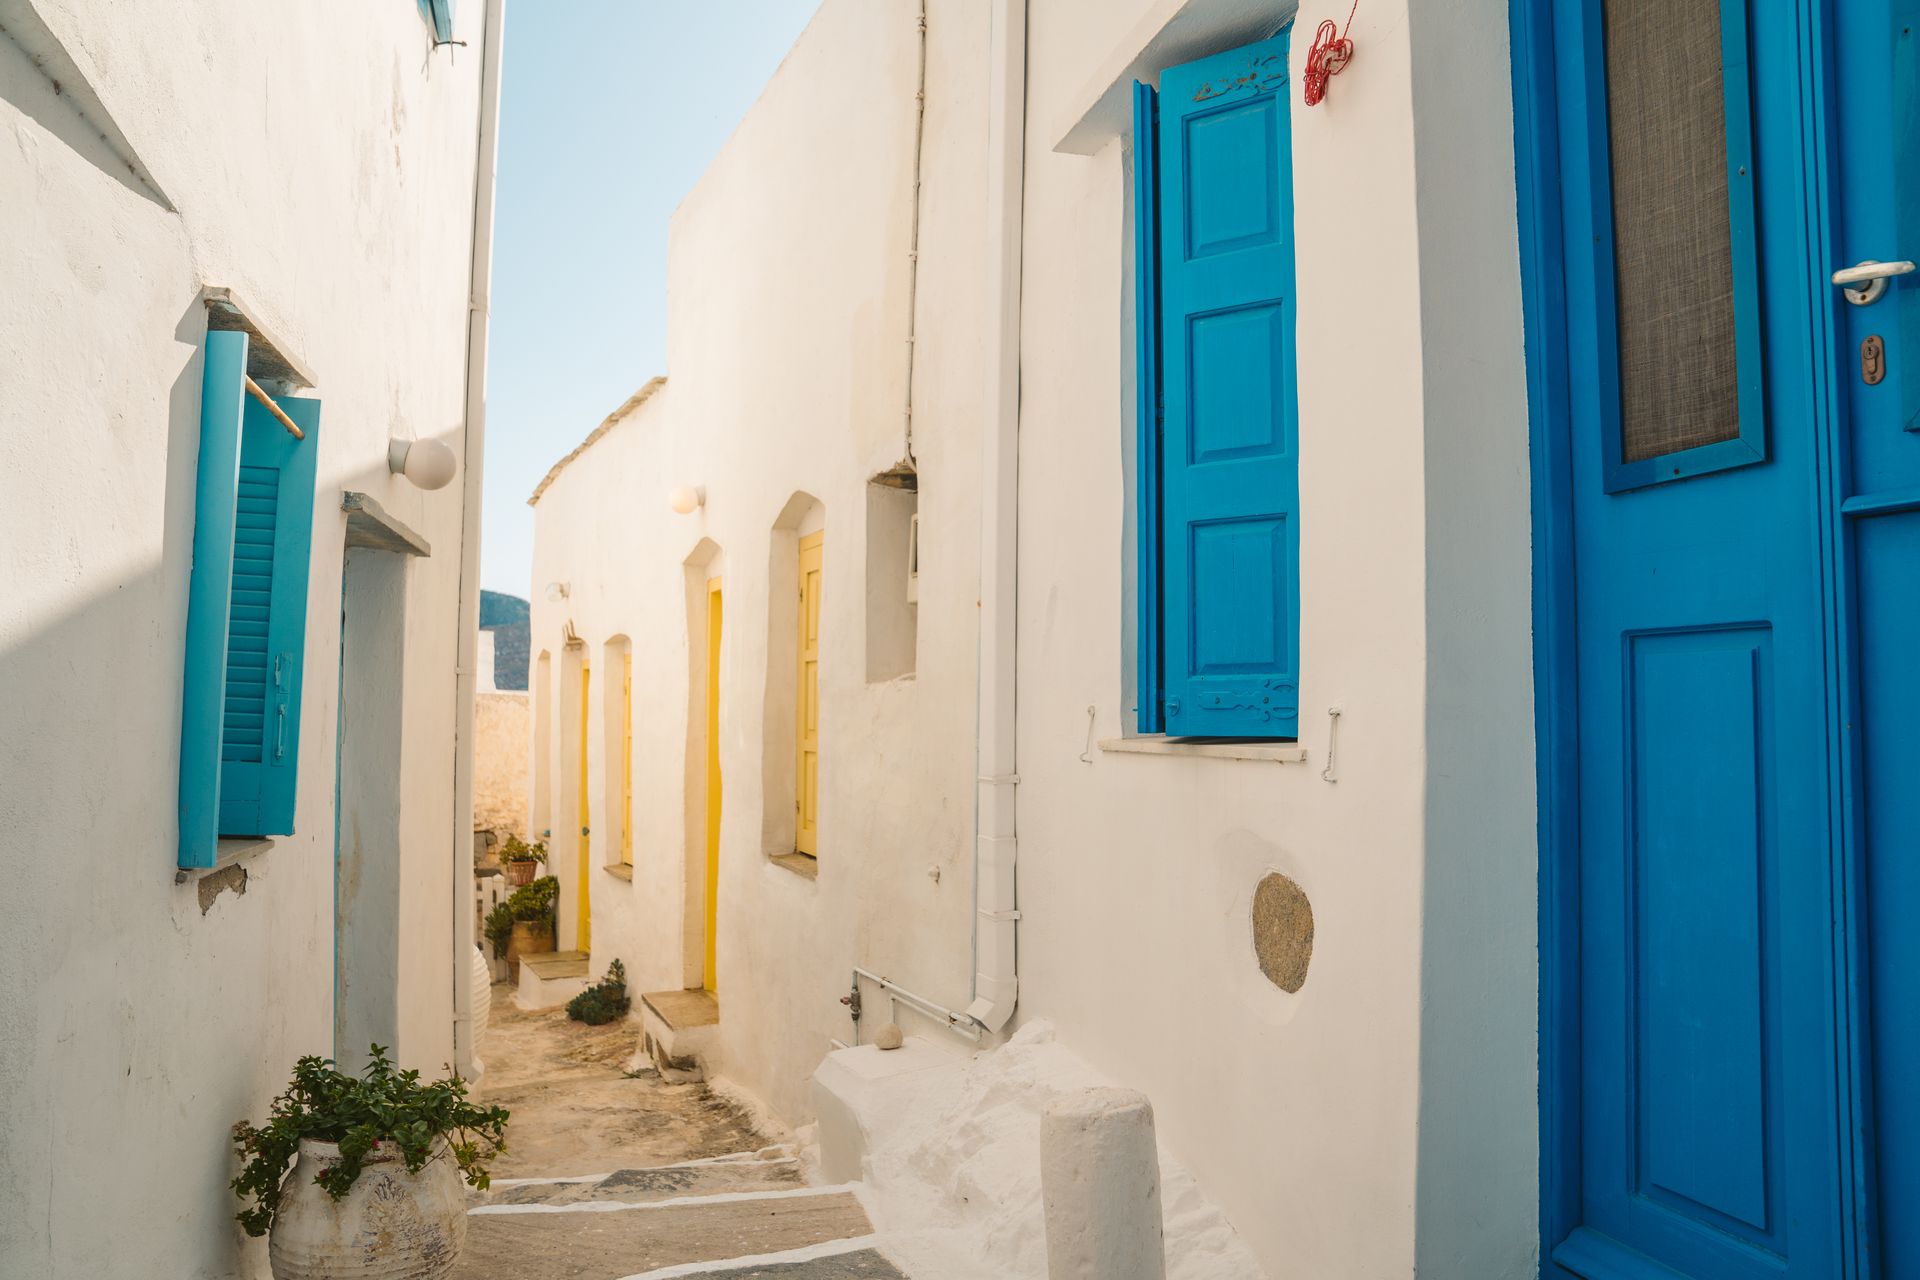 Hora of Serifos invites you to explore a walking experience that encapsulates everything wonderful about a Cycladic island